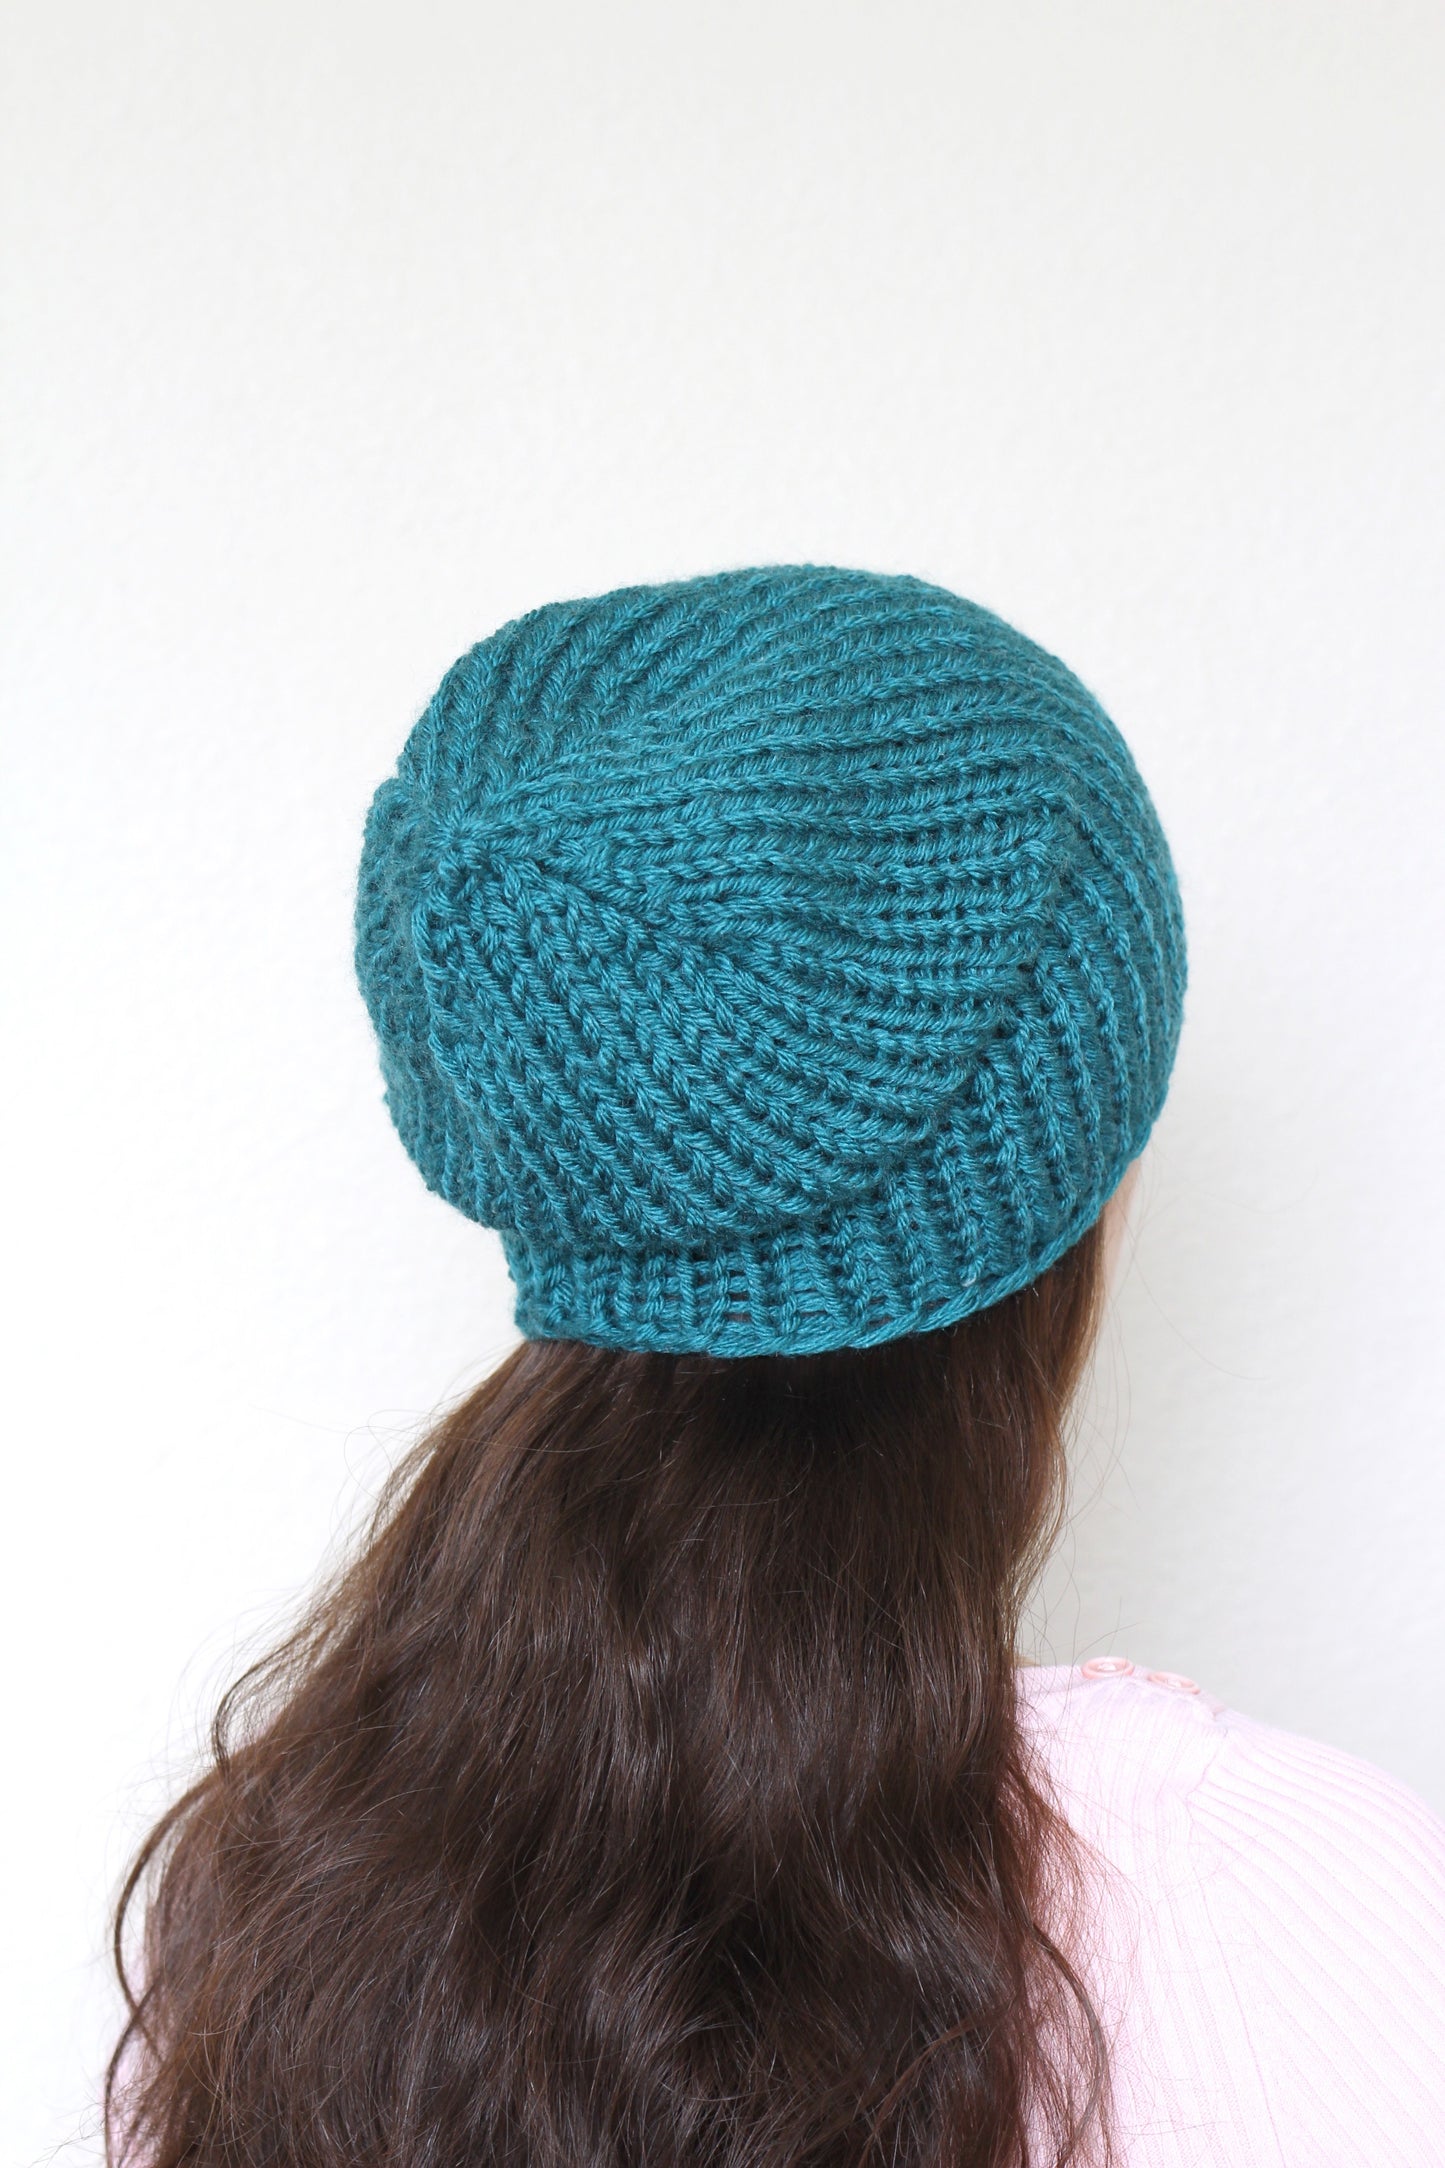 Beanie hat, knit hat, slouchy hat, knit beanie in dark teal color